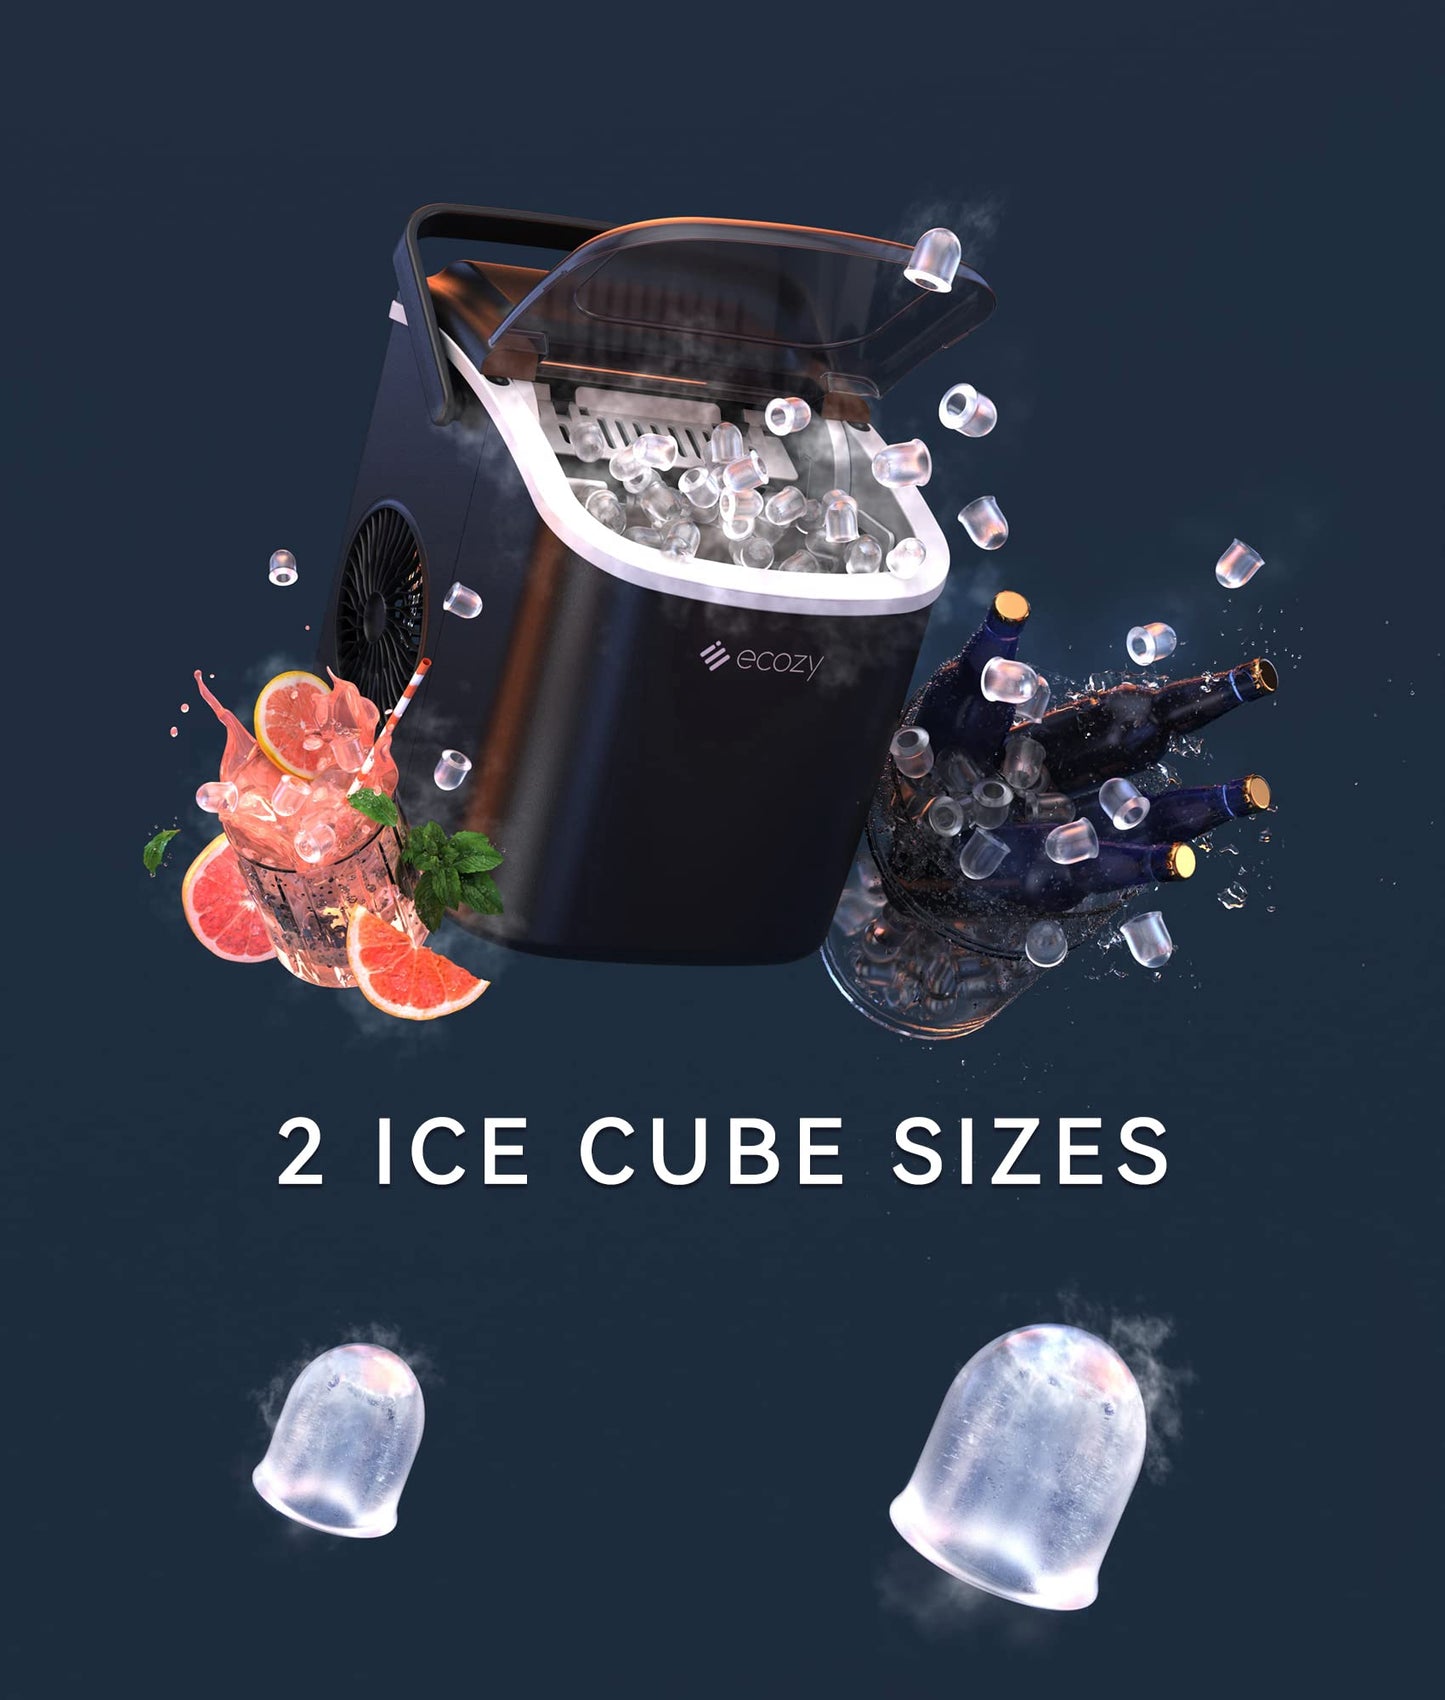 ecozy Portable Countertop Ice Maker - 9 Ice Cubes in 6 Minutes, 26 lbs Daily Output, Self-Cleaning with Ice Bags, Scoop